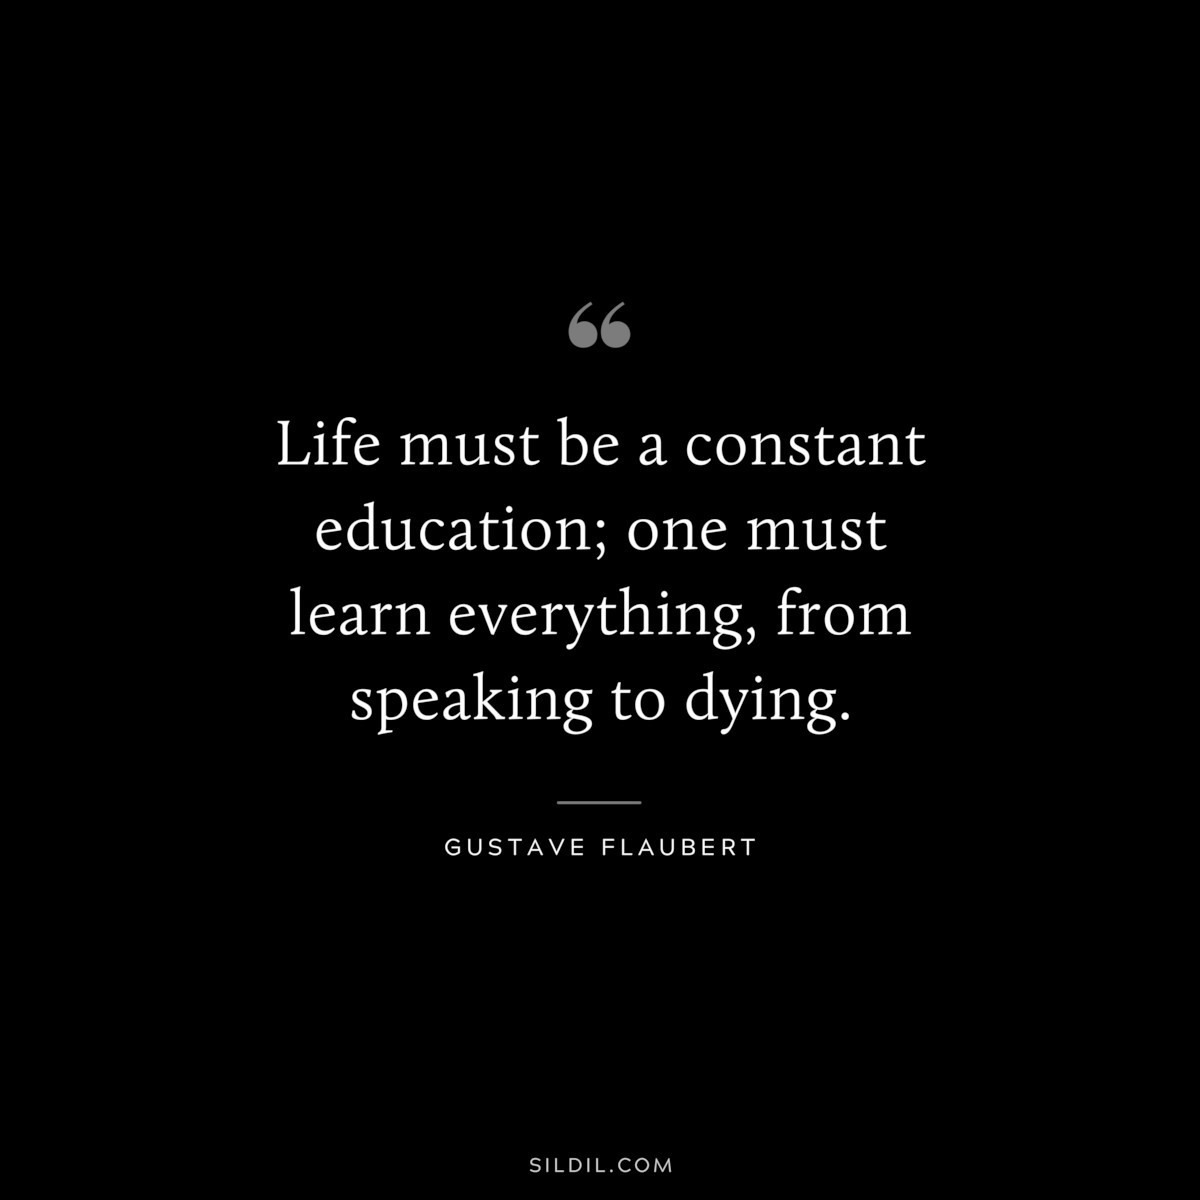 Life must be a constant education; one must learn everything, from speaking to dying. ― Gustave Flaubert